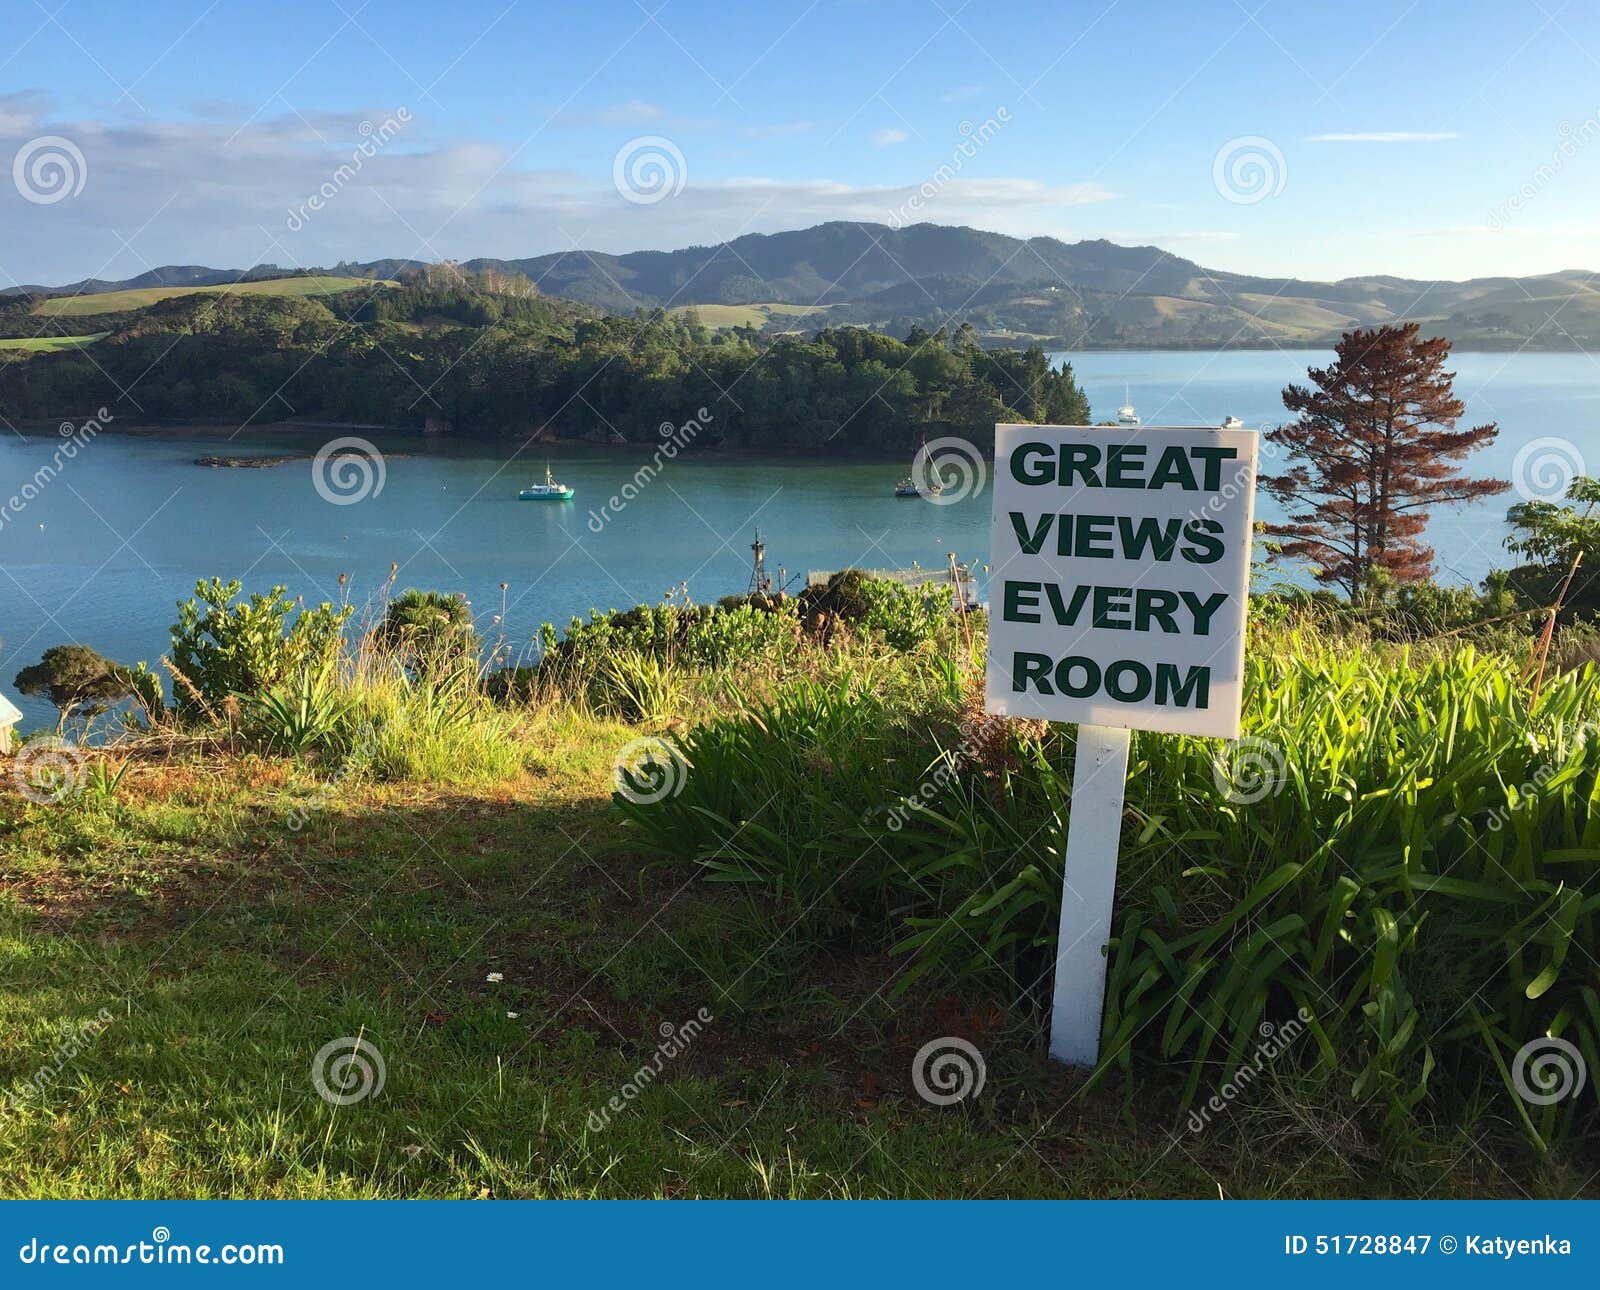 sign promoting tourism in mangonui harbour, northland, new zealand